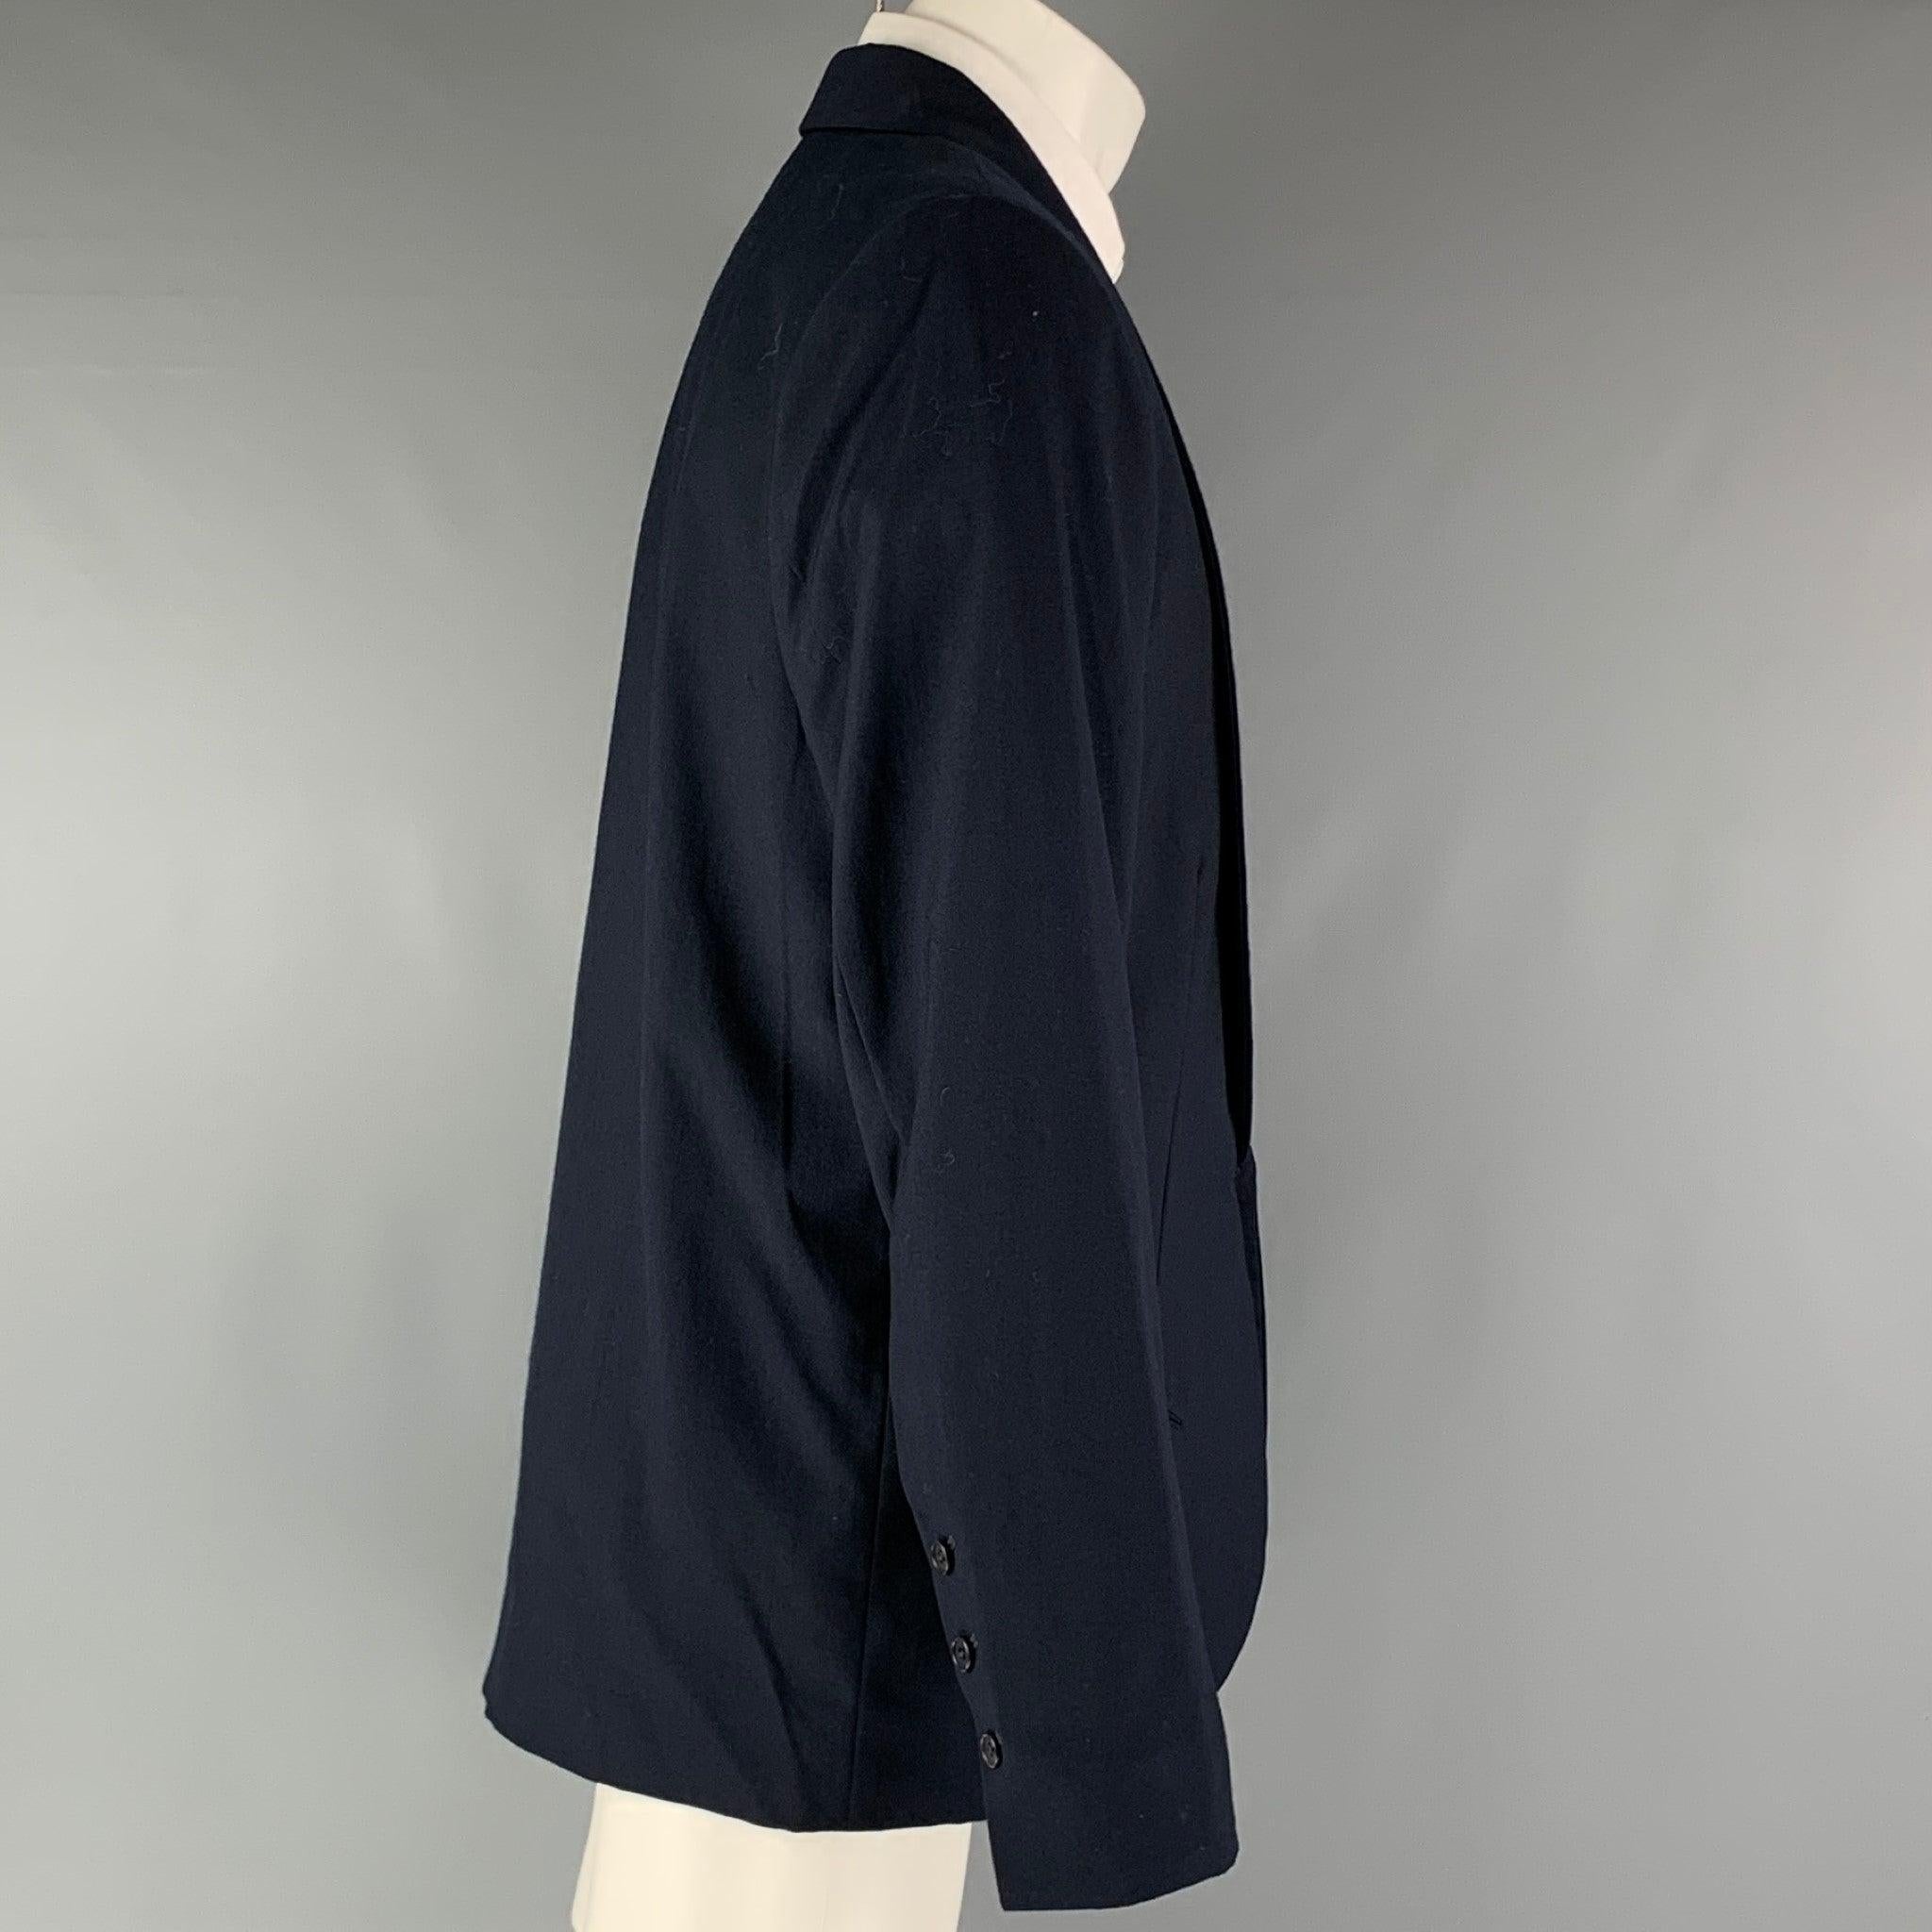 RICHARD TYLER Size 40 Navy Wool Shawl Collar Sport Coat In Good Condition For Sale In San Francisco, CA